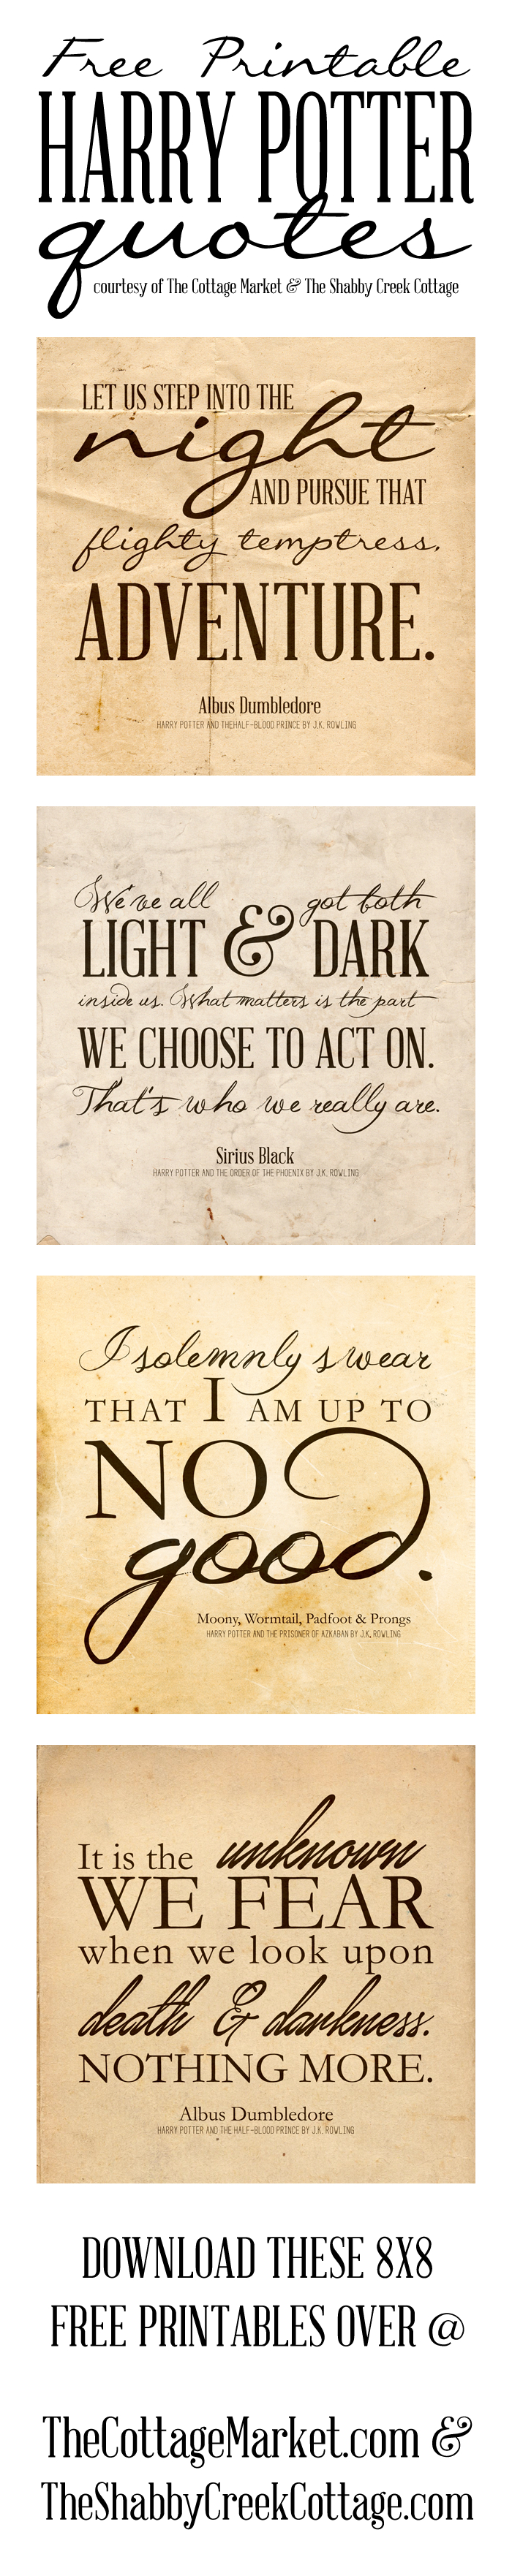 Free Printable Harry Potter Quotes | The Cottage Market - Free Printable Harry Potter Posters